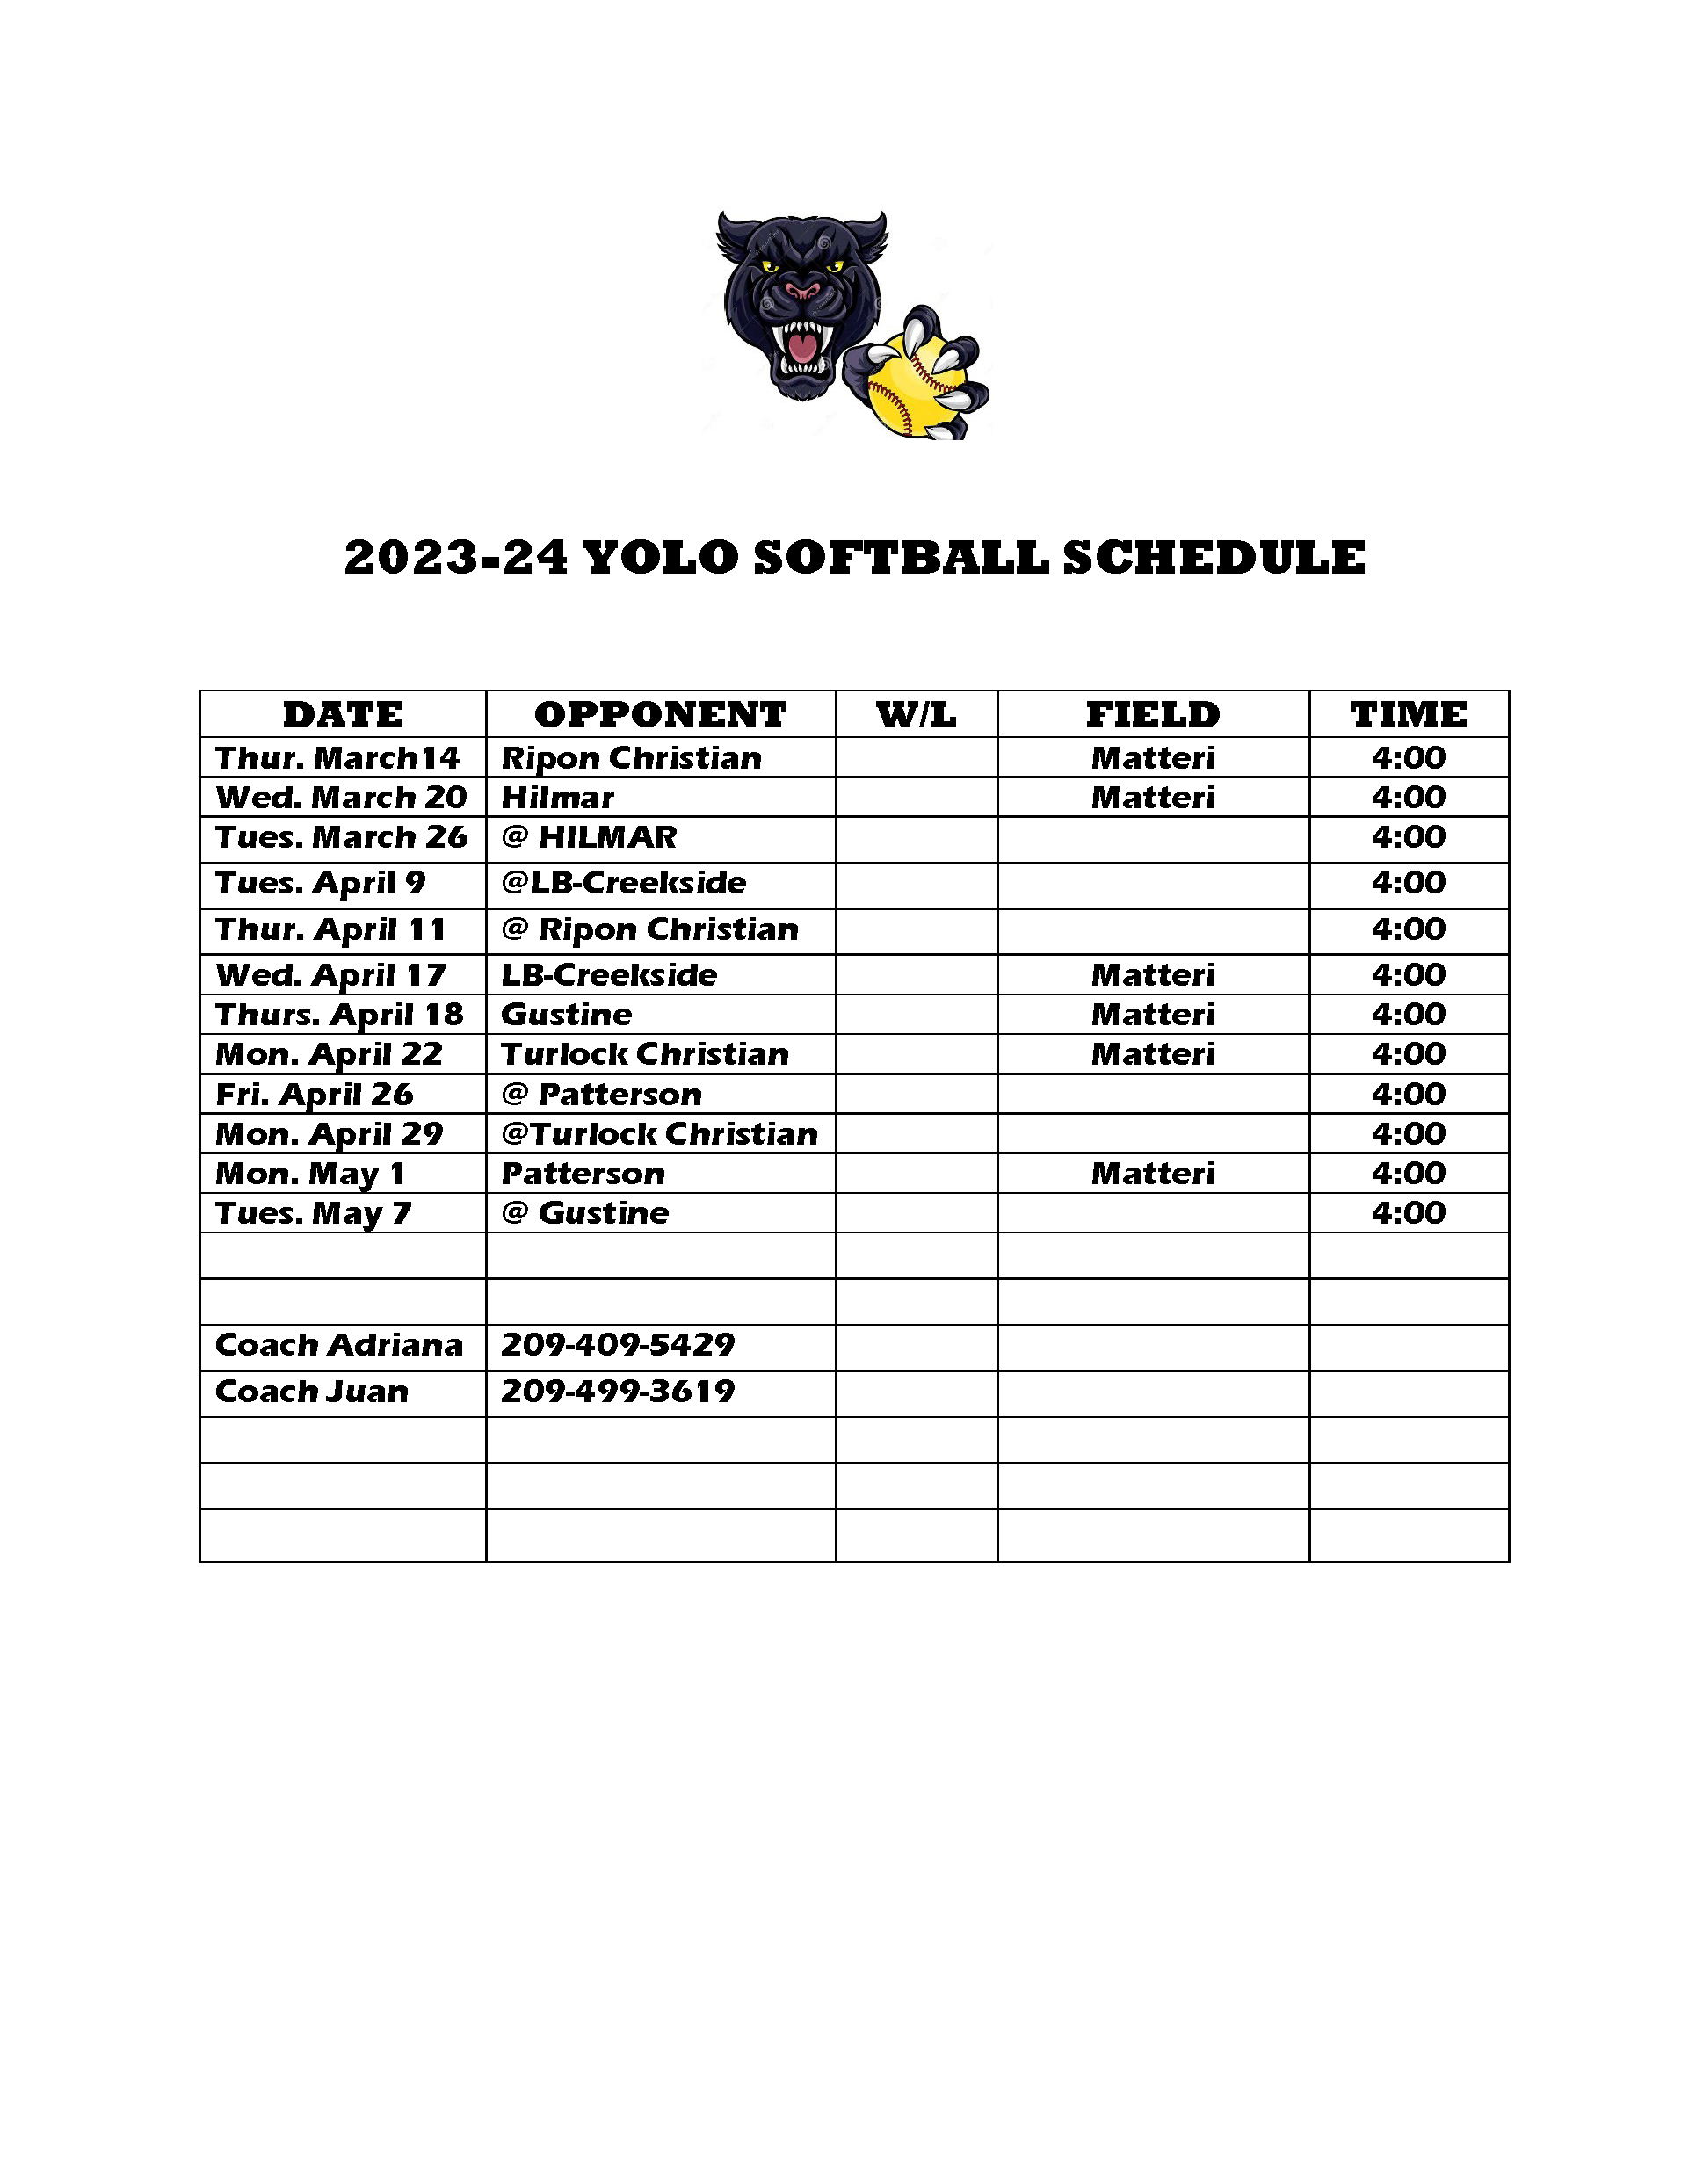 Yolo Softball Schedule-link to PDF